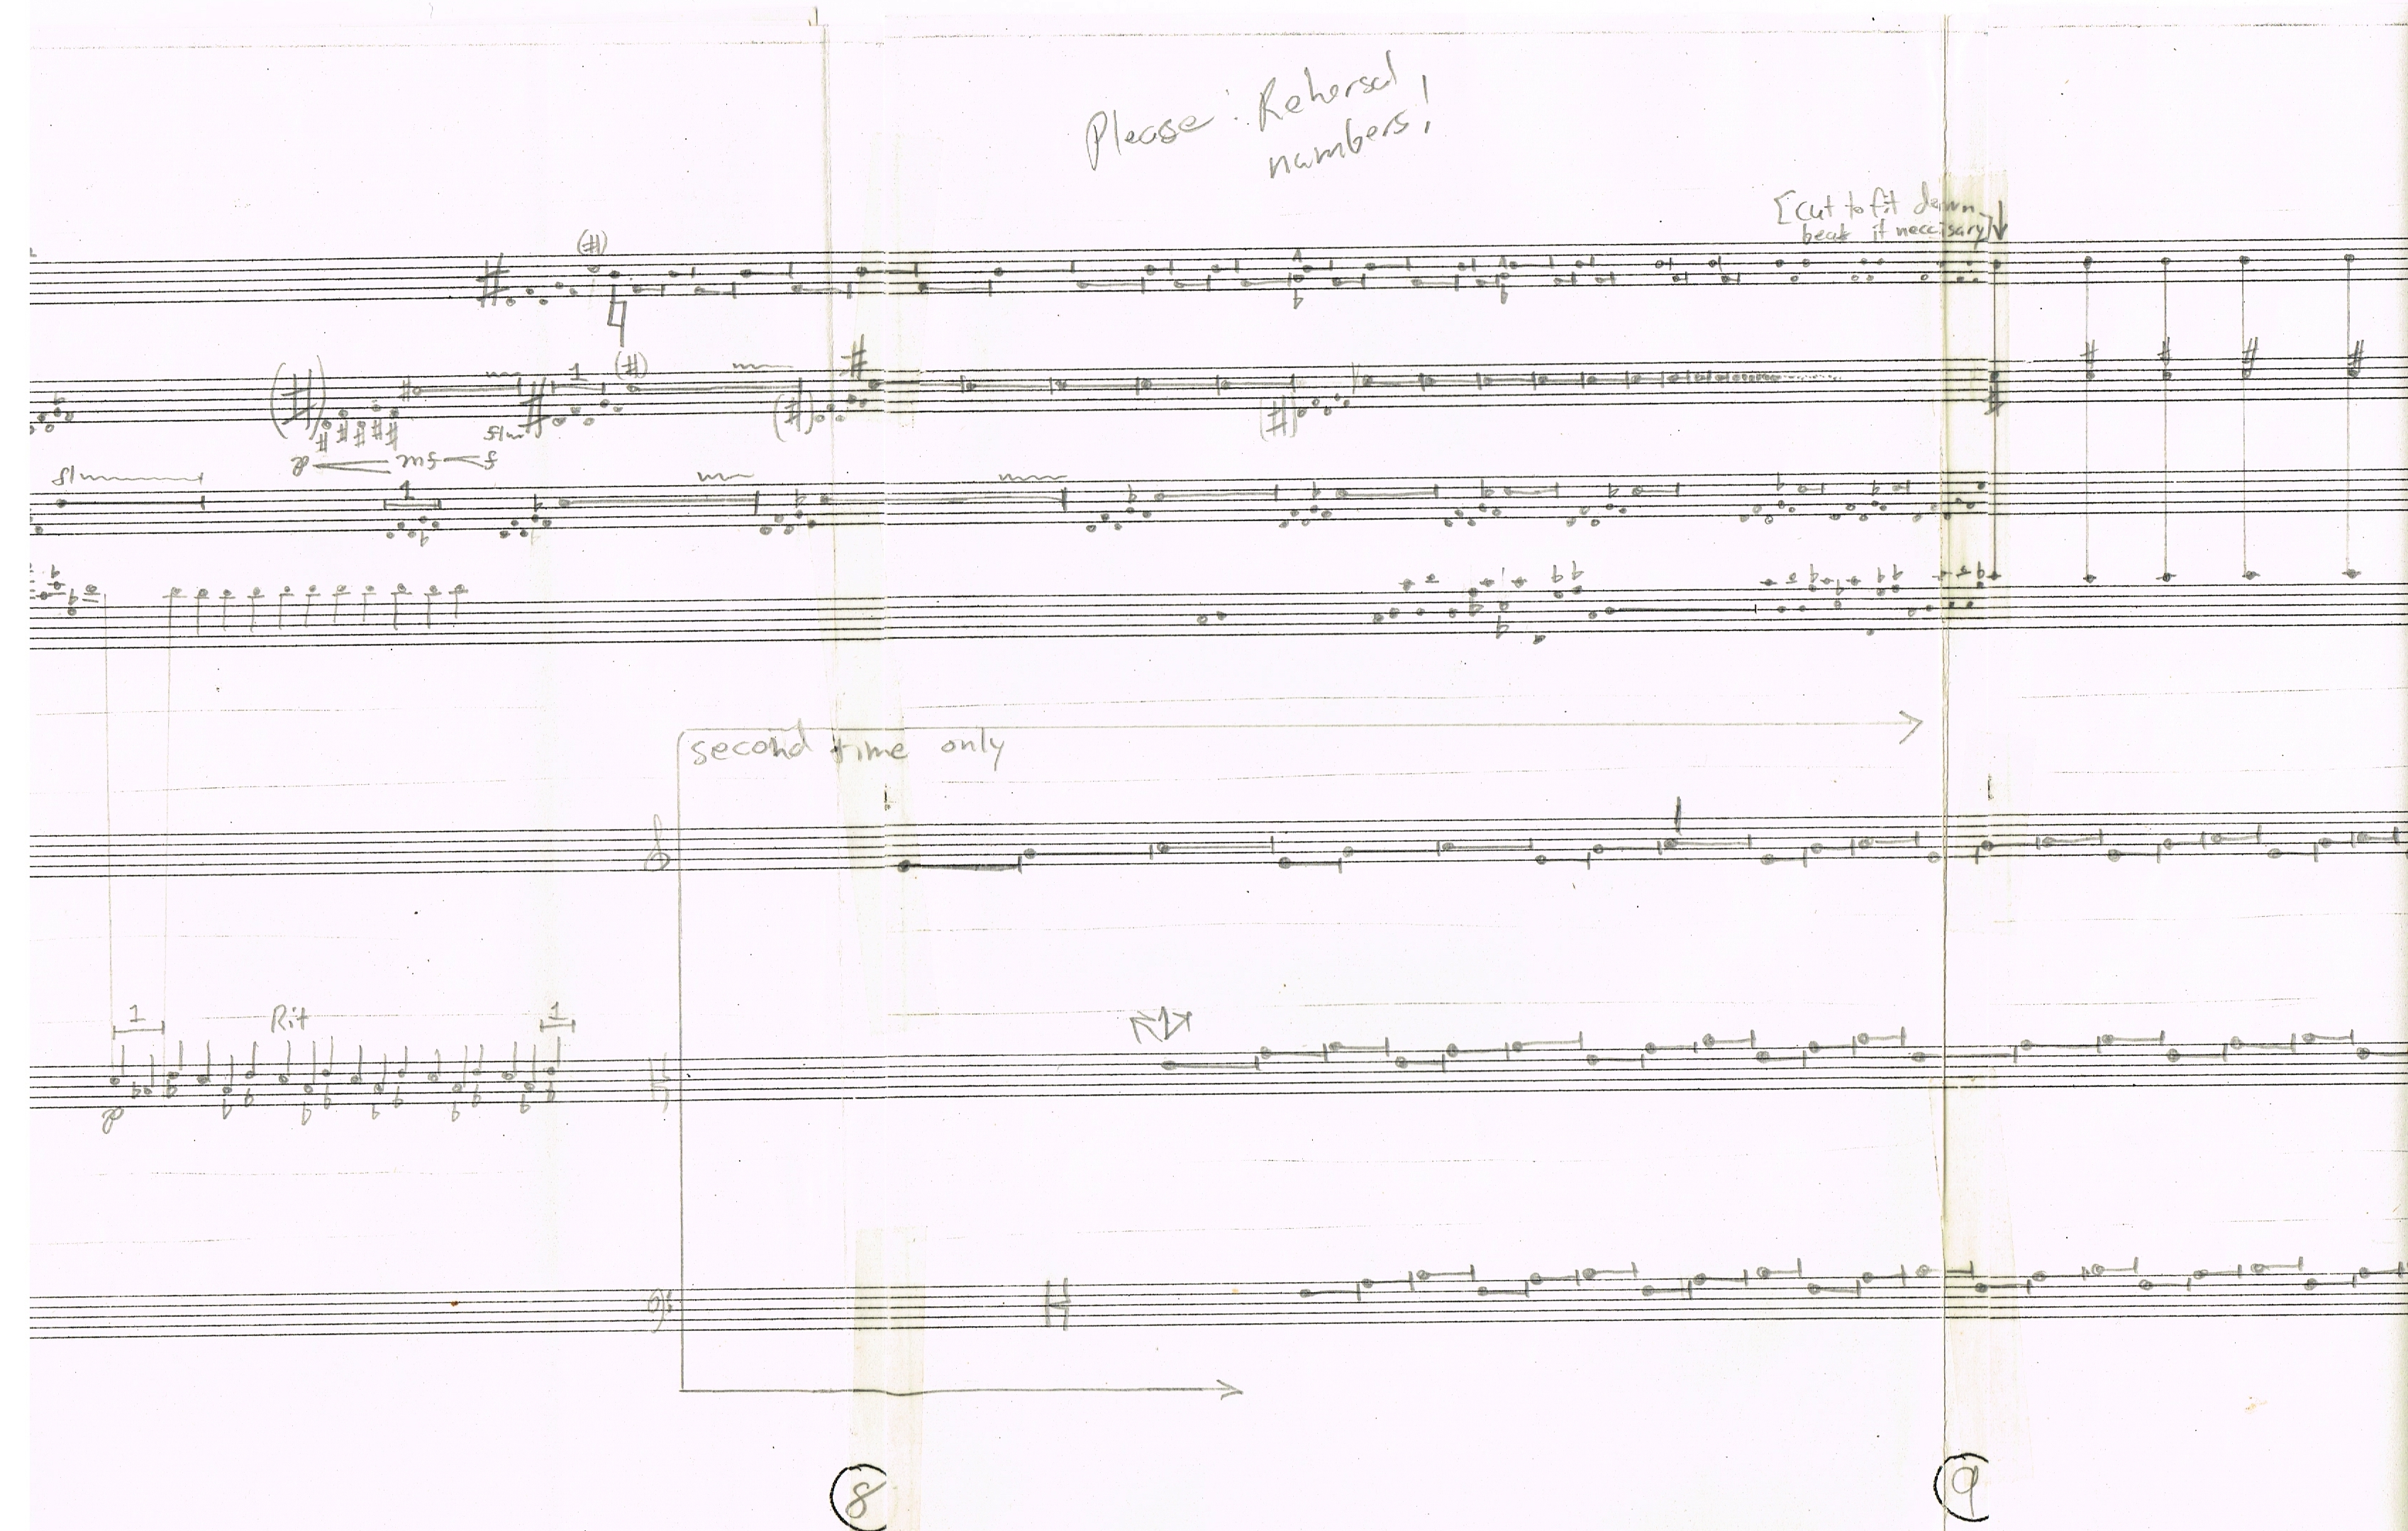 Richard Burdick's composition "mind without Matter" from 1979 page 1